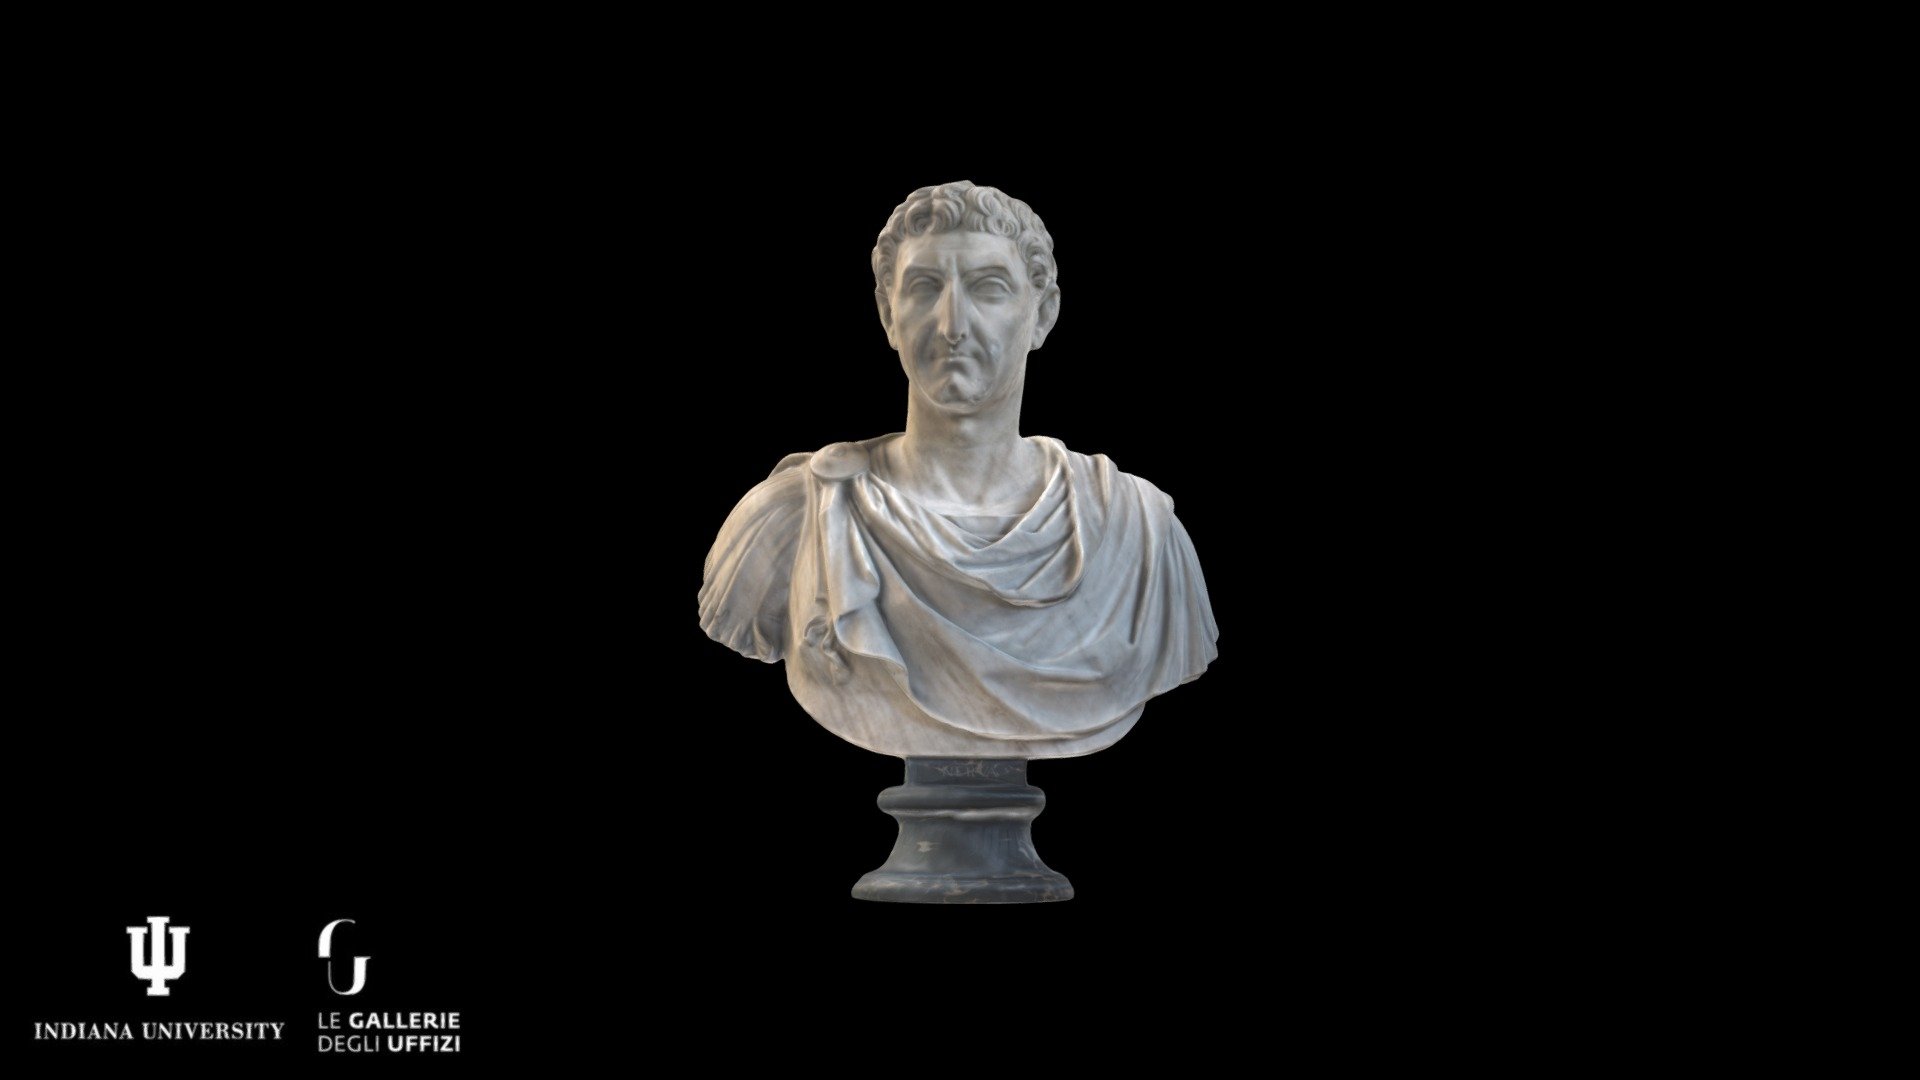 To see our entire collection, check out our website!

Identifiers

Title/Name: Nerva

Inventory: Inv. 1914 n. 132

Mansuelli: II.79

Characteristics 

Format: Bust

Artist: Unknown

Date: 1st century CE

Materials: Greek Marble

Inscription: NERVA (modern)

Dimensions: H 75 cm (total), 35 cm (ancient)

Paradata

Camera: Sony α6000 with Zeiss Touit 12 mm F/2.8 lens

Photographer: Umair Malik

Reconstruction Software: Lightroom, Photoscan, Meshmixer, ZBrush, Photoshop, Meshlab

Modeler: Umair Malik

Studi e Restauri Publication: n/a

Copyright 2017 – Ministero dei Beni e delle Attivita’ Culturali e del Turismo – Gallerie degli Uffizi – Tutti i diritti riservati. All rights reserved 3d model